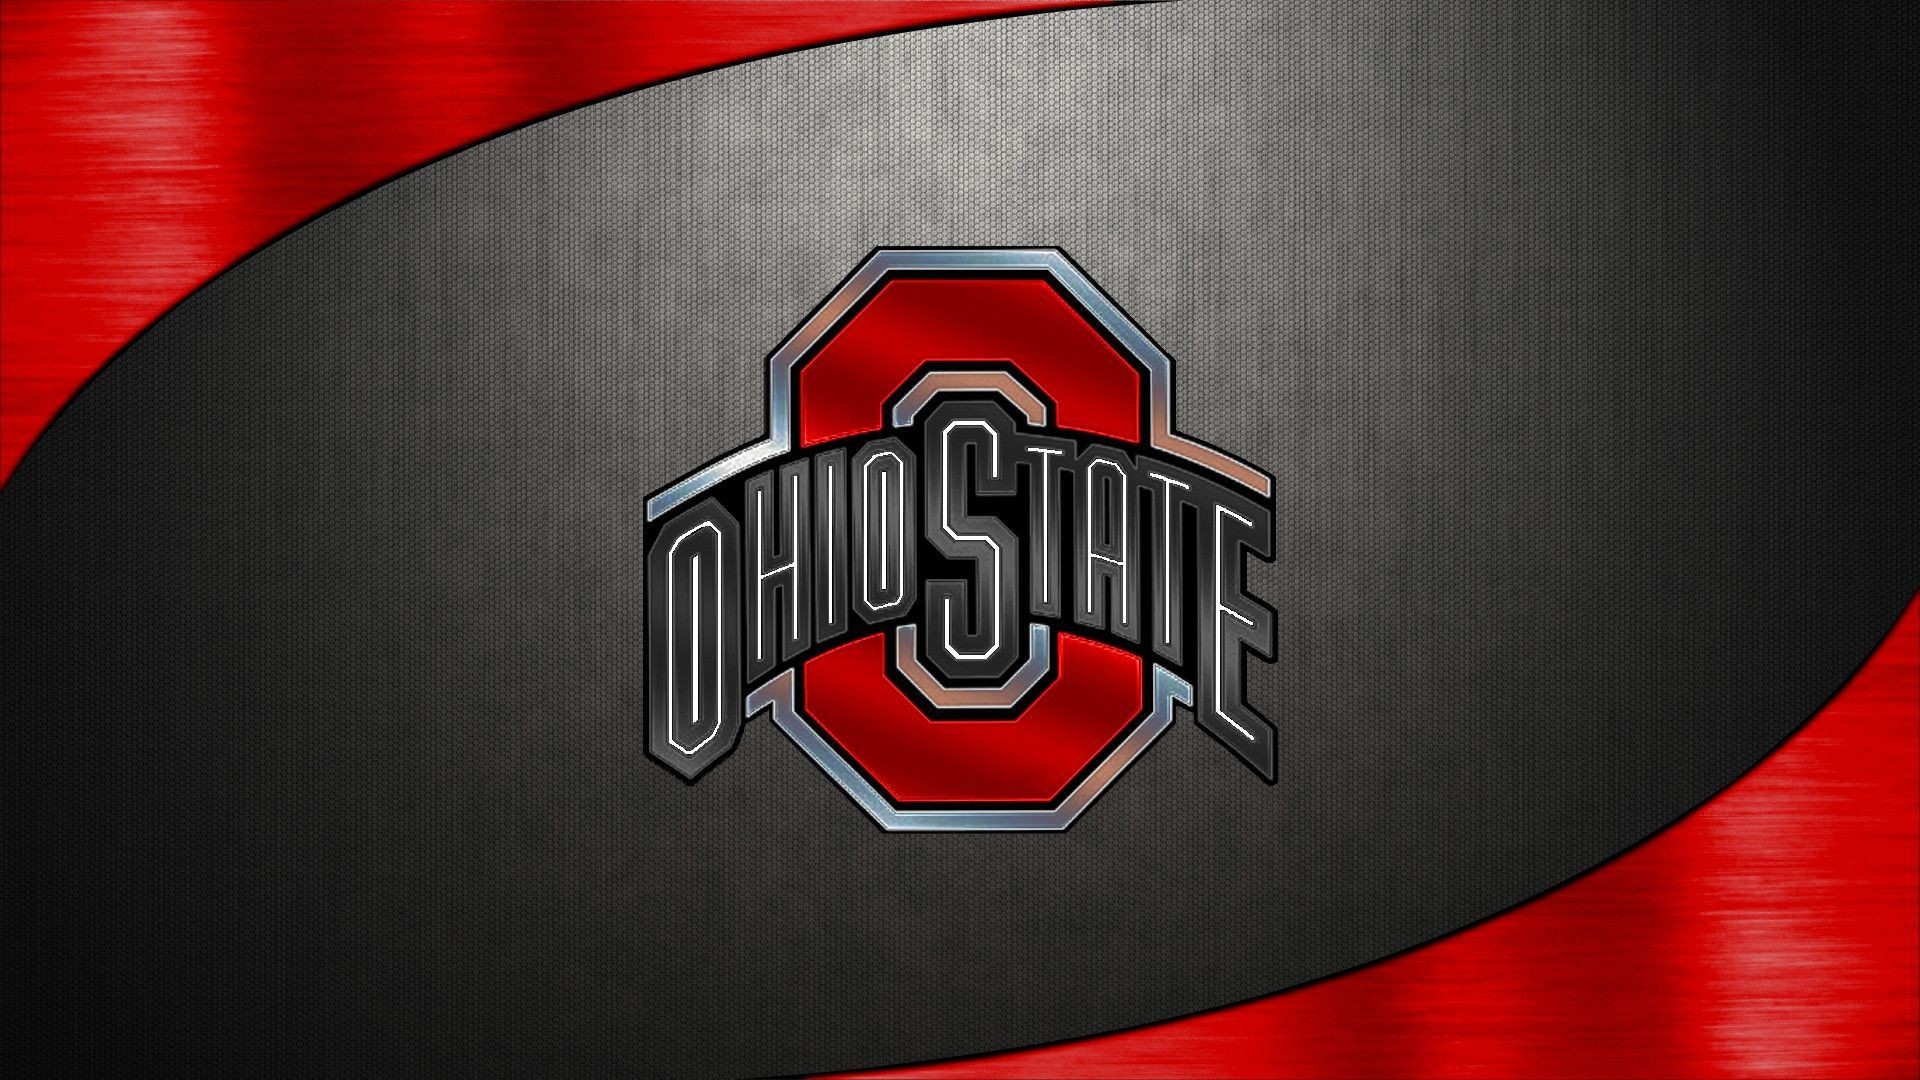 1920x1080 Ohio State Football Wallpaper | HD Wallpapers | Pinterest | Wallpaper and  Hd wallpaper